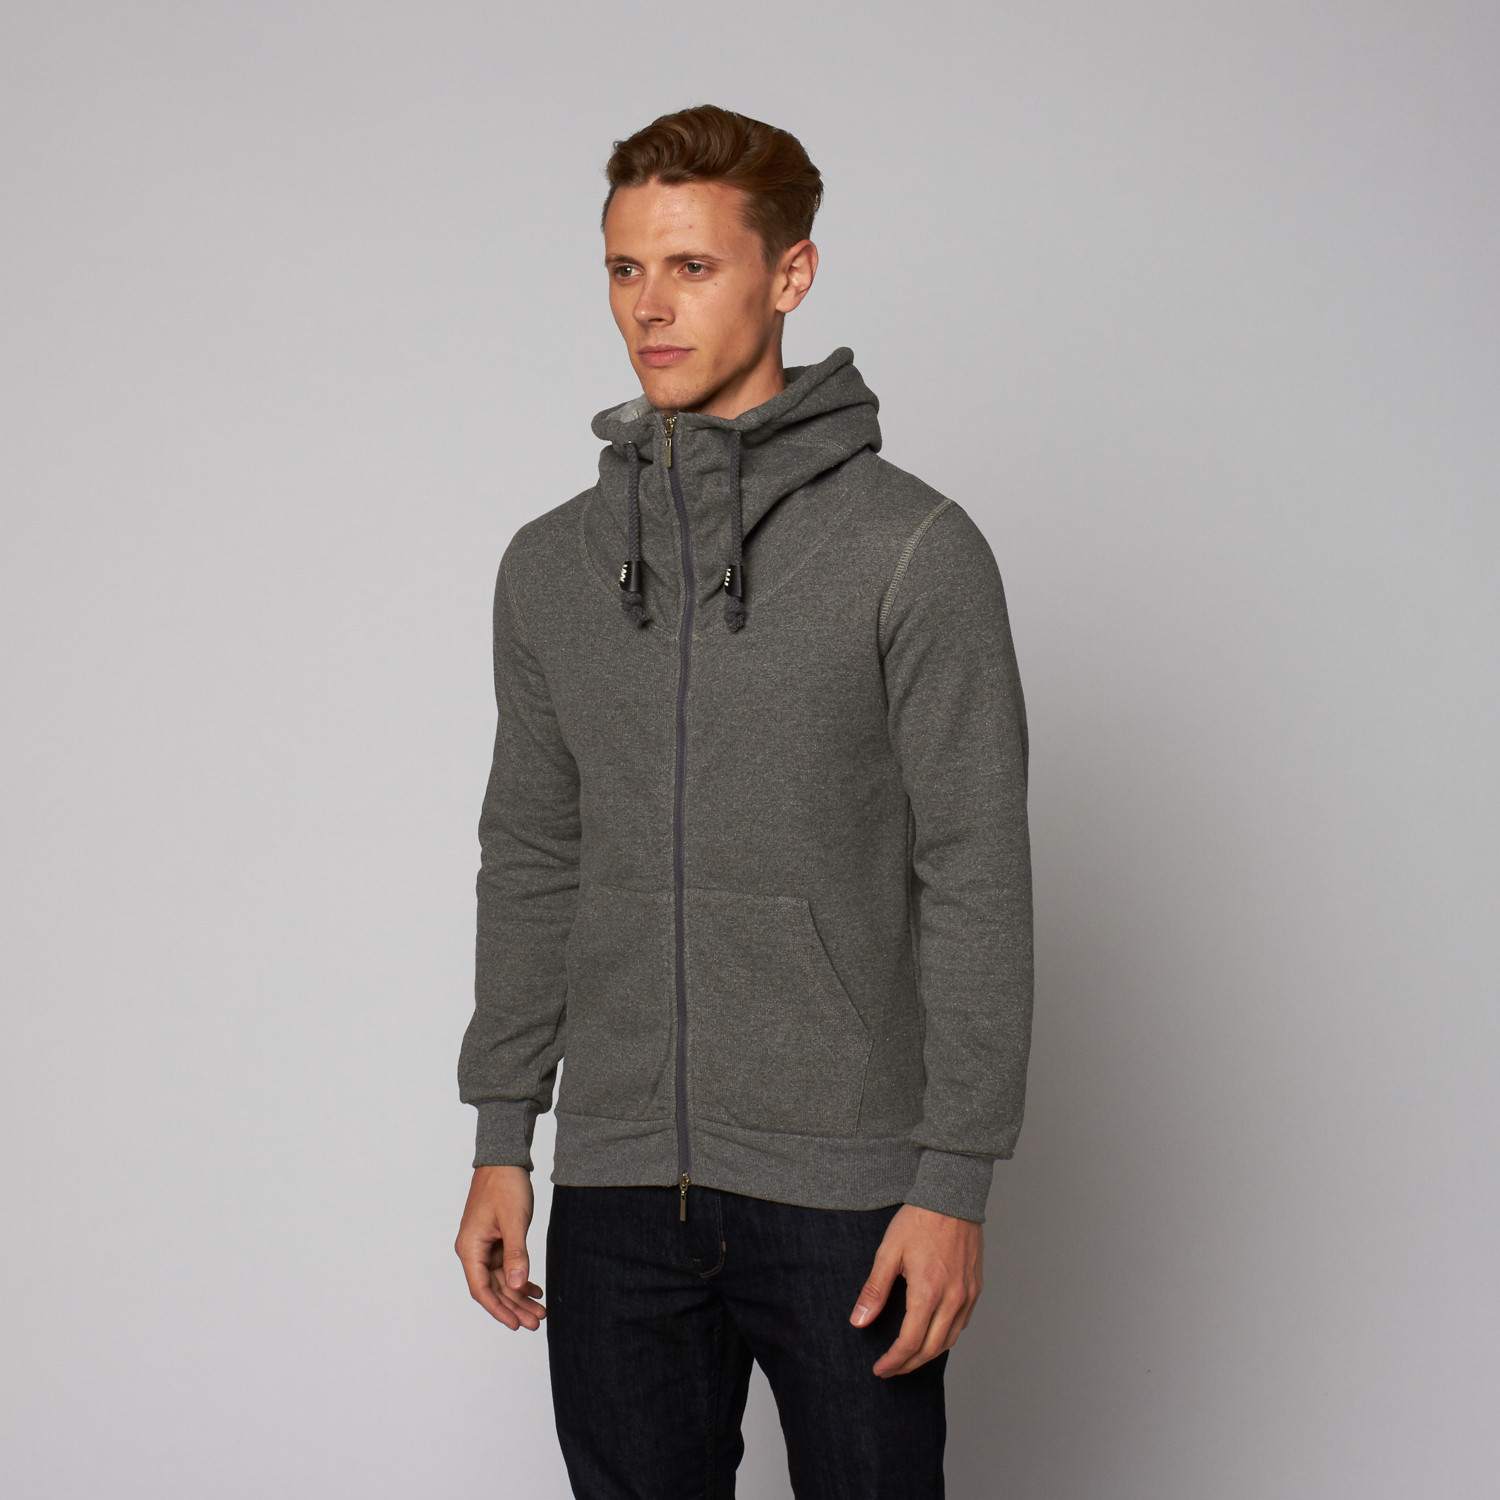 Zip Hoodie // Charcoal (S) - Jerry Kaye - Touch of Modern